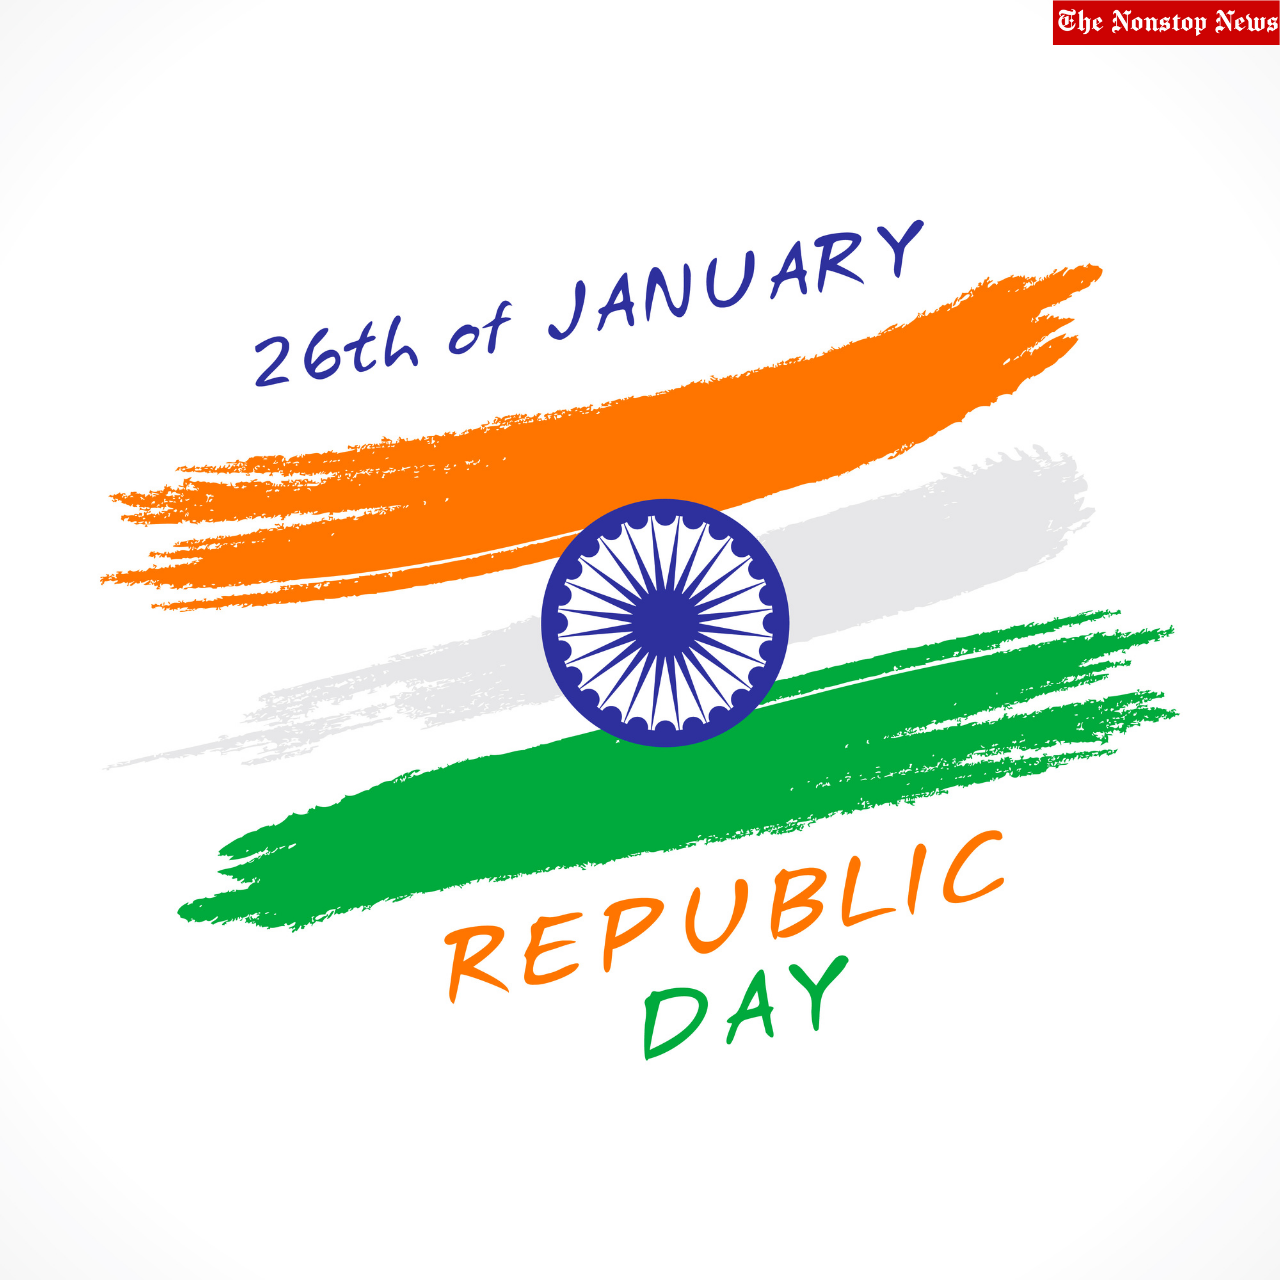 Happy Indian Republic Day 2022 Posters, Background, Drawings, Banners, PNG, Clipart, HD Wallpapers to Download